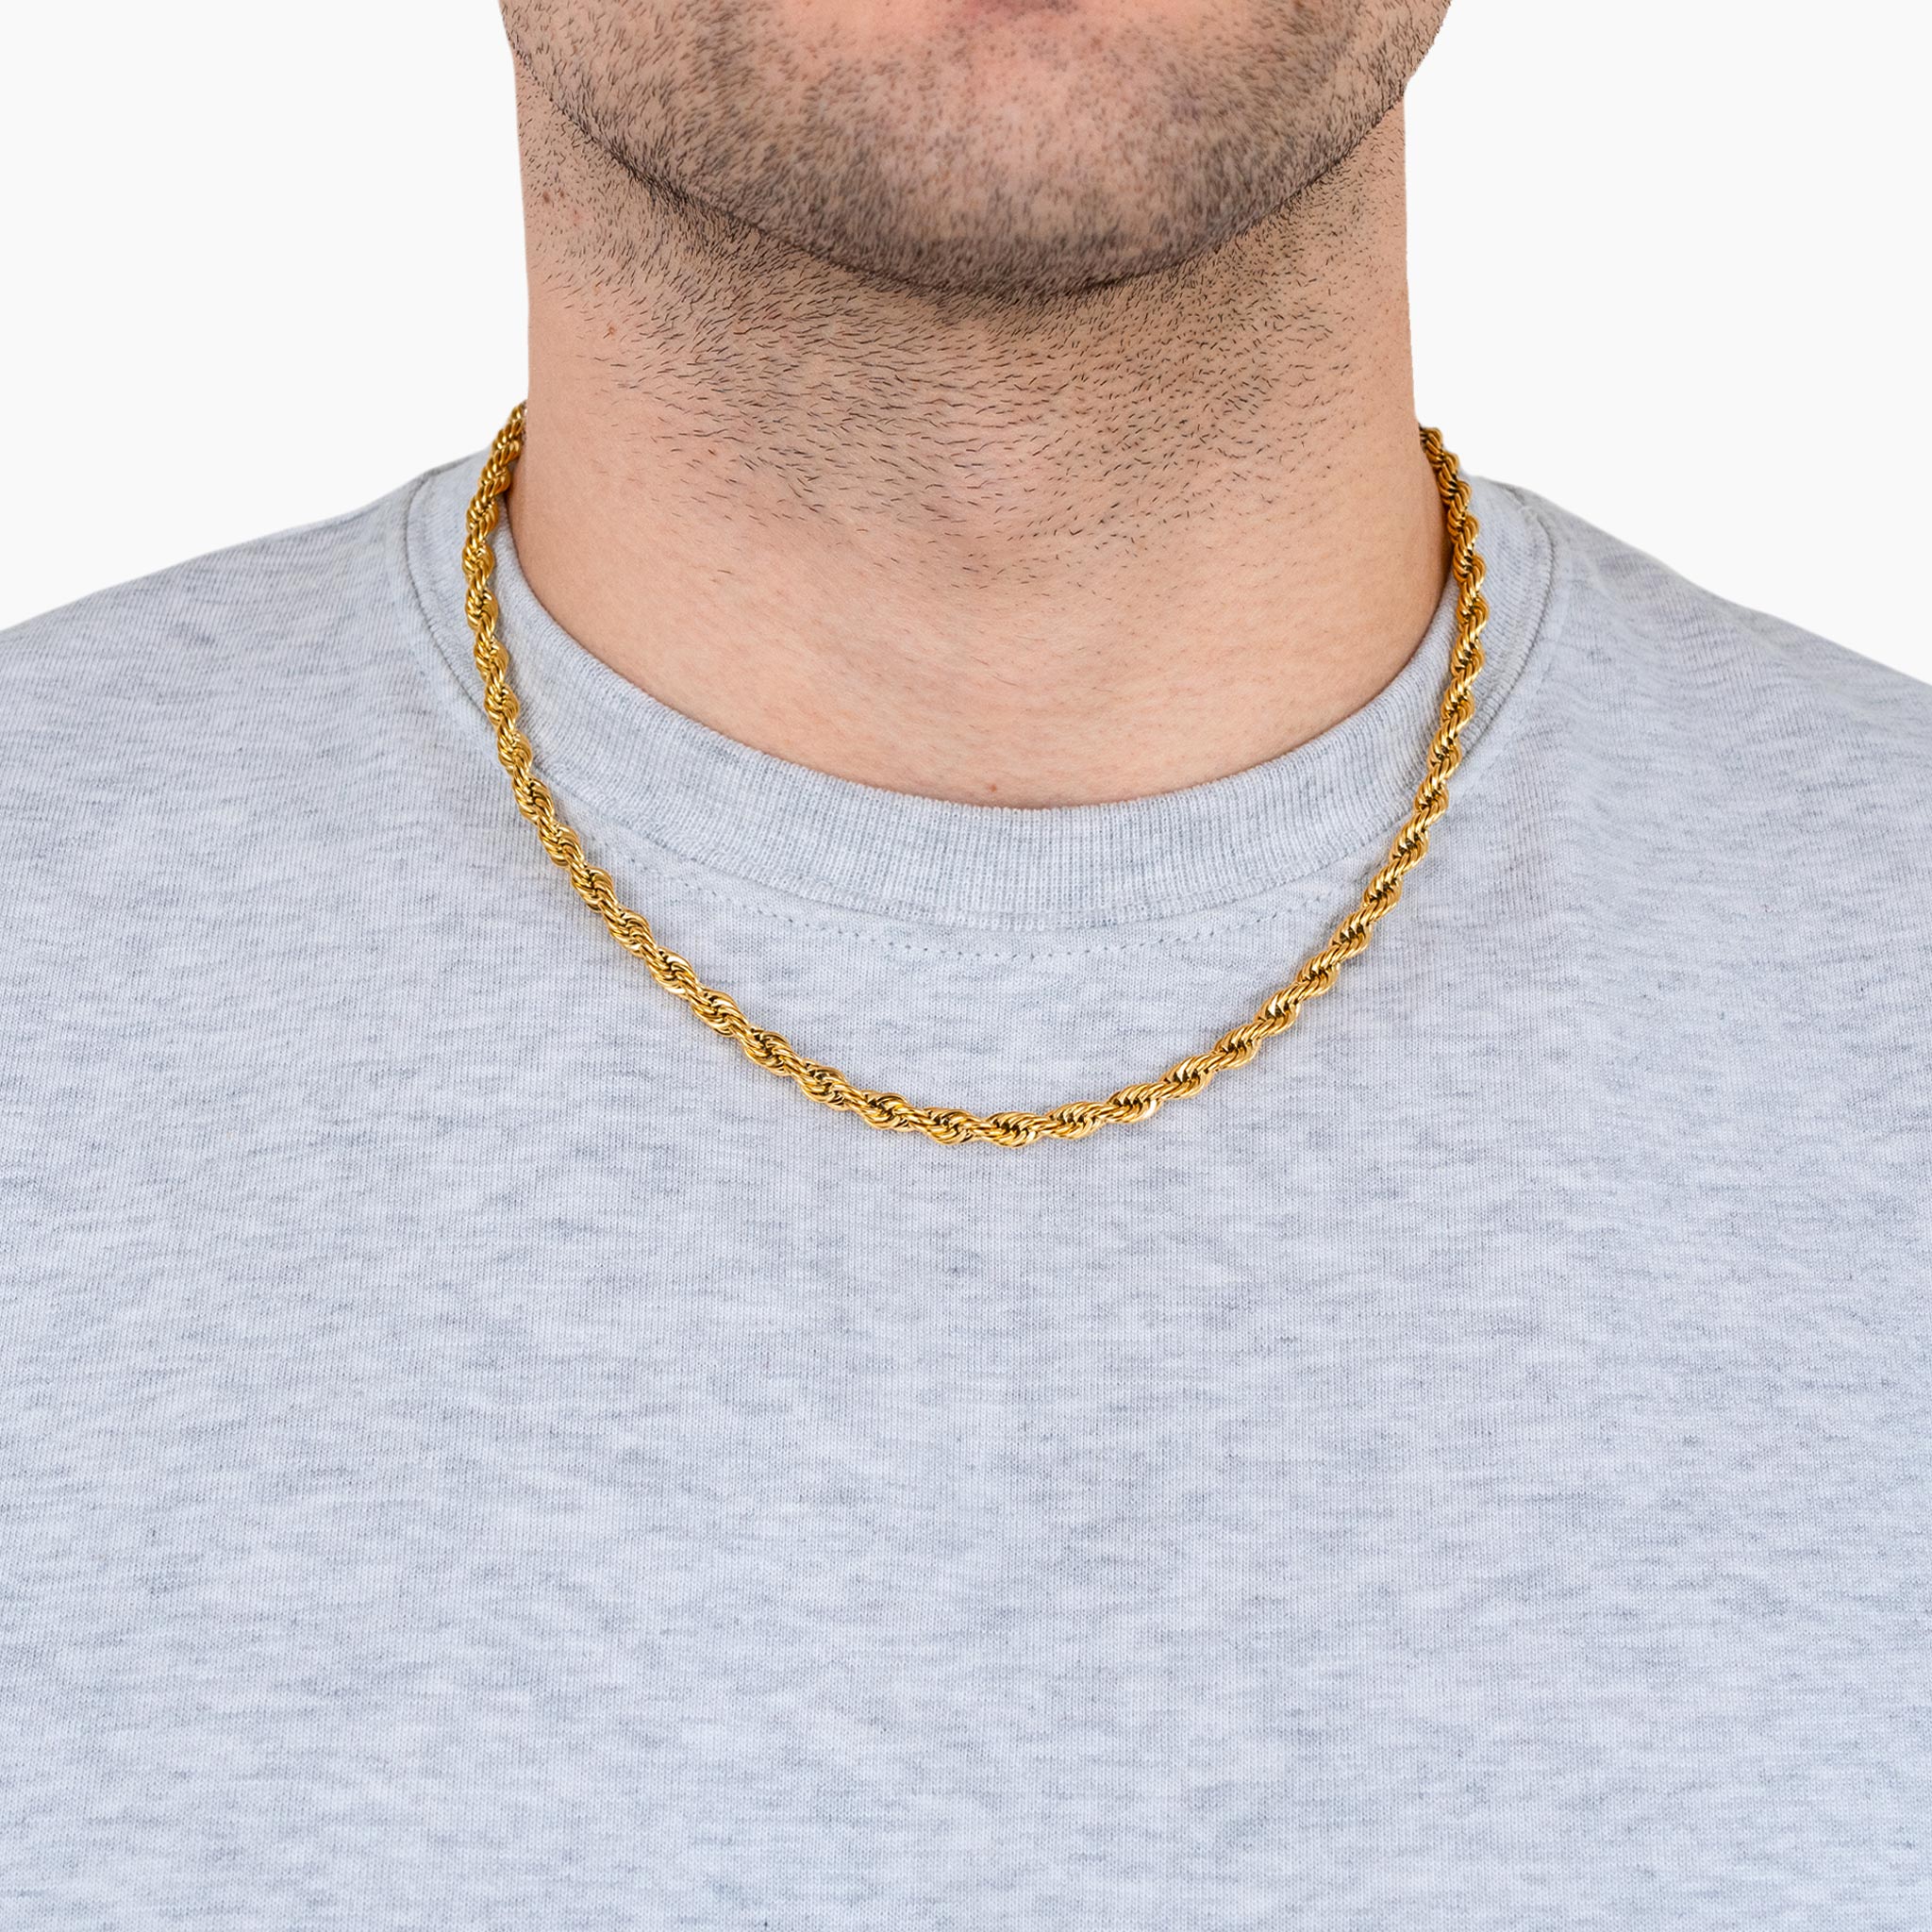 5mm Twisted Rope Chain - Gold